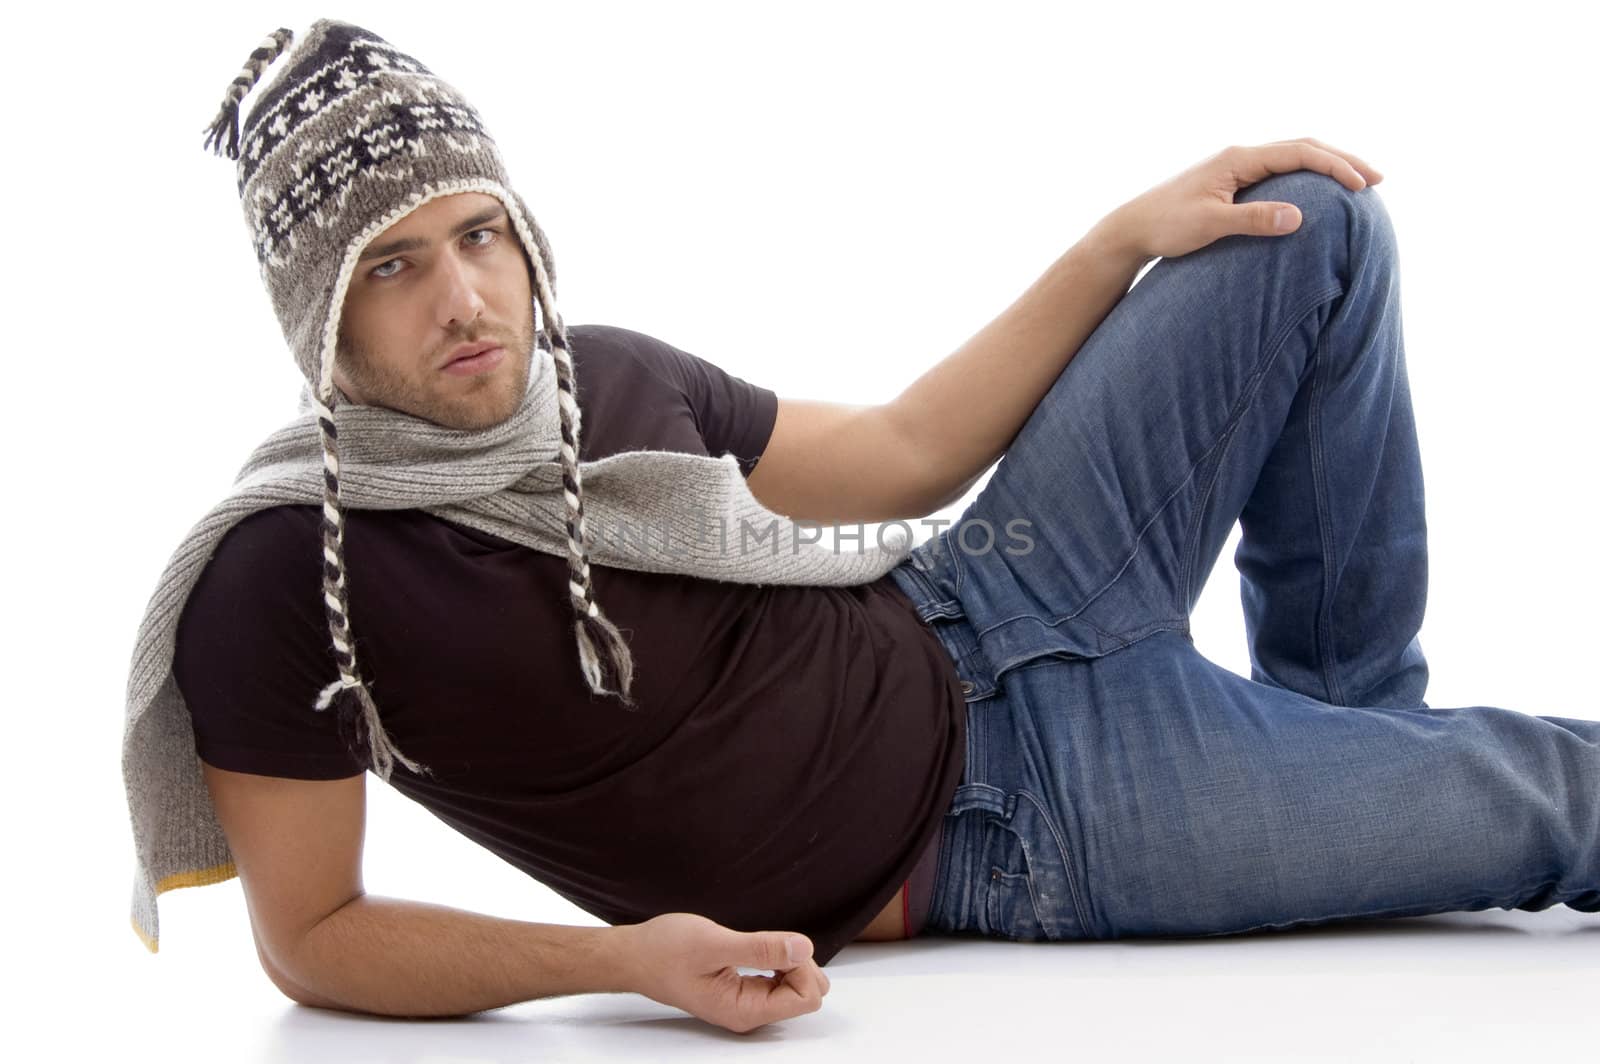 cool handsome guy wearing woolen cap against white background